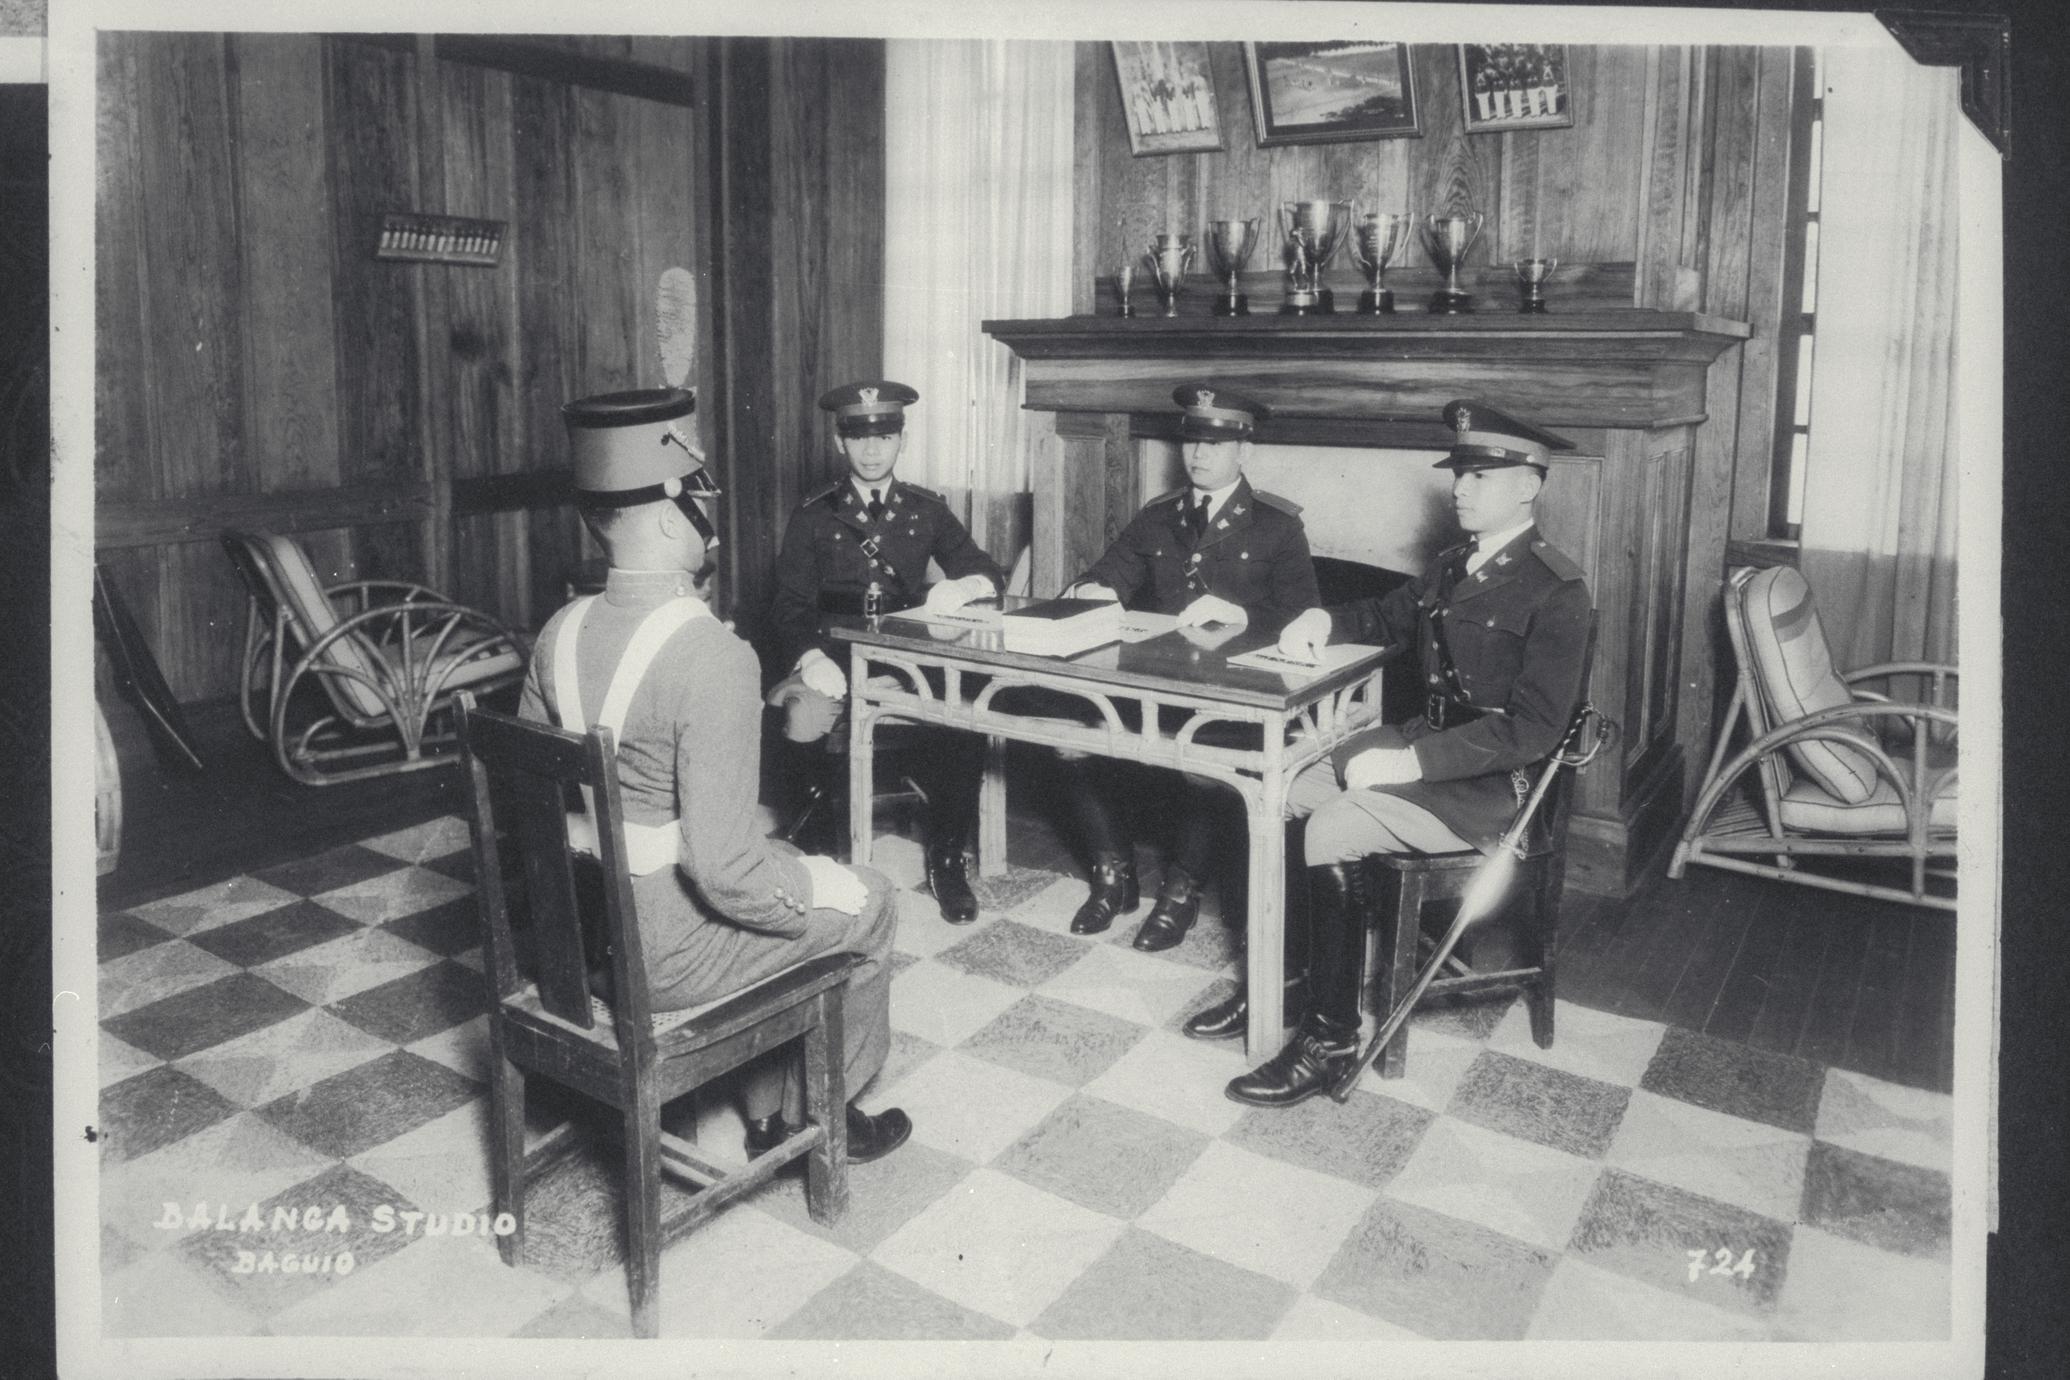 Battalion board interviewing a cadet, Philippine Military Academy